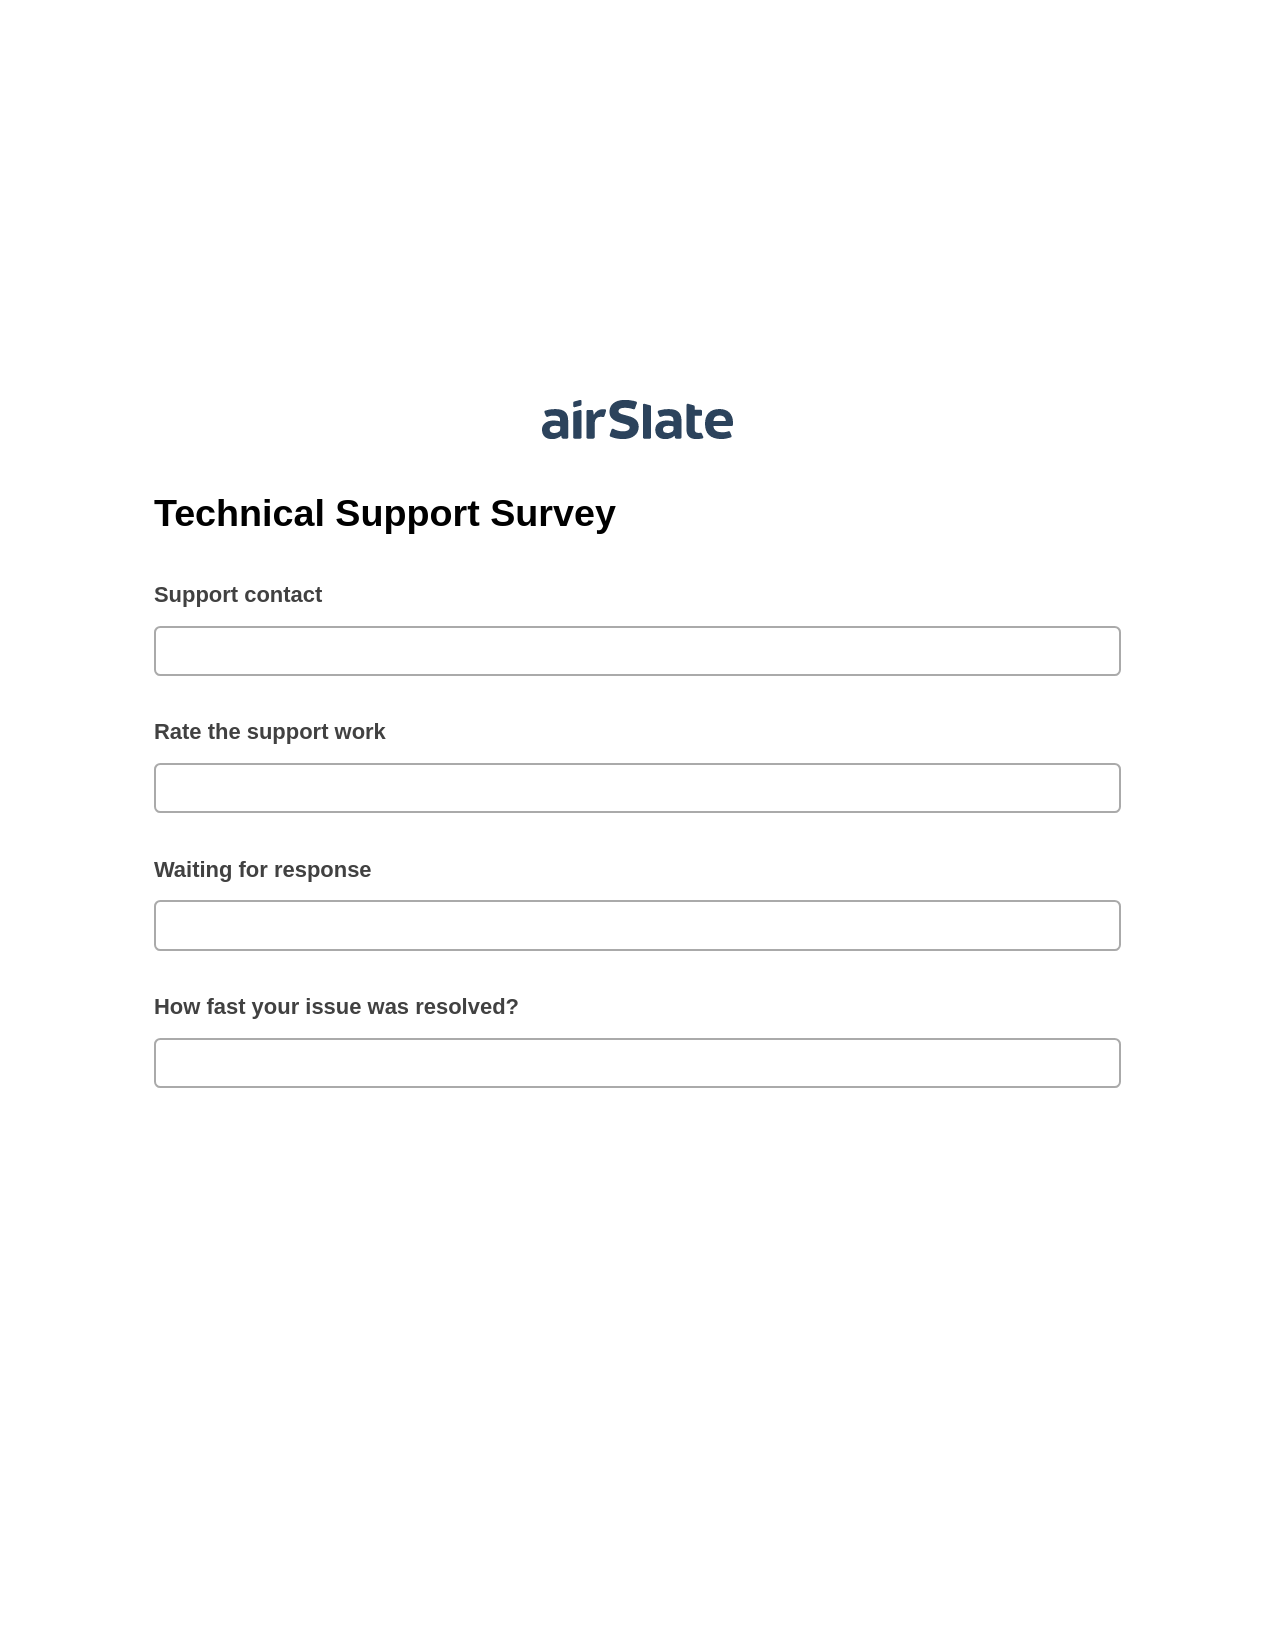 Technical Support Survey Pre-fill from Excel Spreadsheet Bot, Create slate from another Flow Bot, Post-finish Document Bot